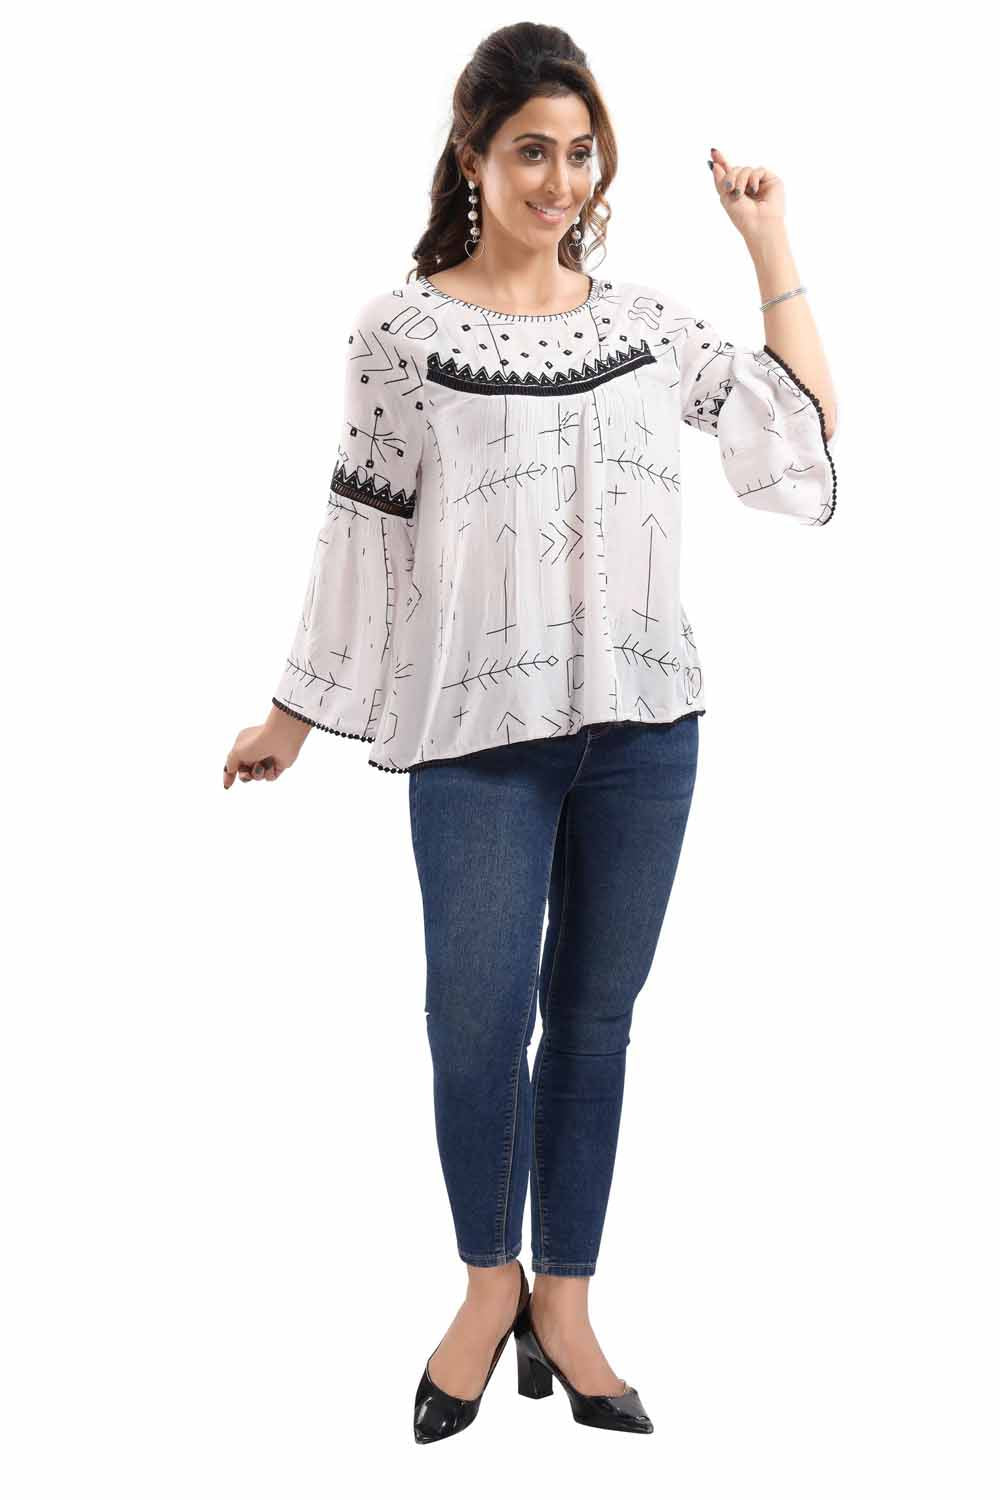 KAIRA WHITE SINTHETIC  EMBROIDERED WESTERN SHORT TOP